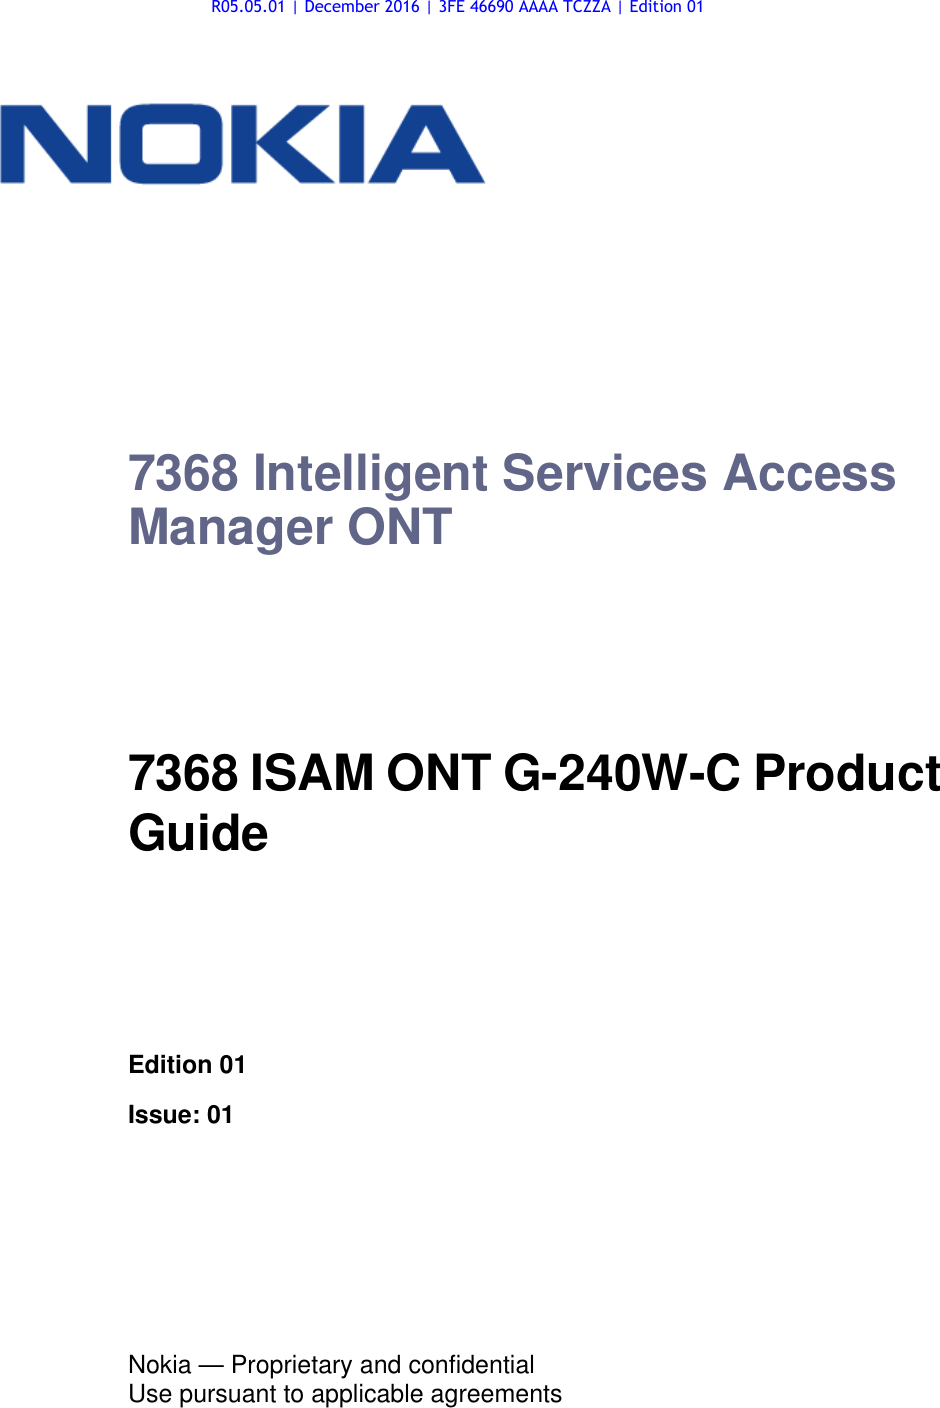 Page 1 of Nokia Bell G240W-C GPON ONU User Manual 7368 ISAM ONT G 240W B Product Guide